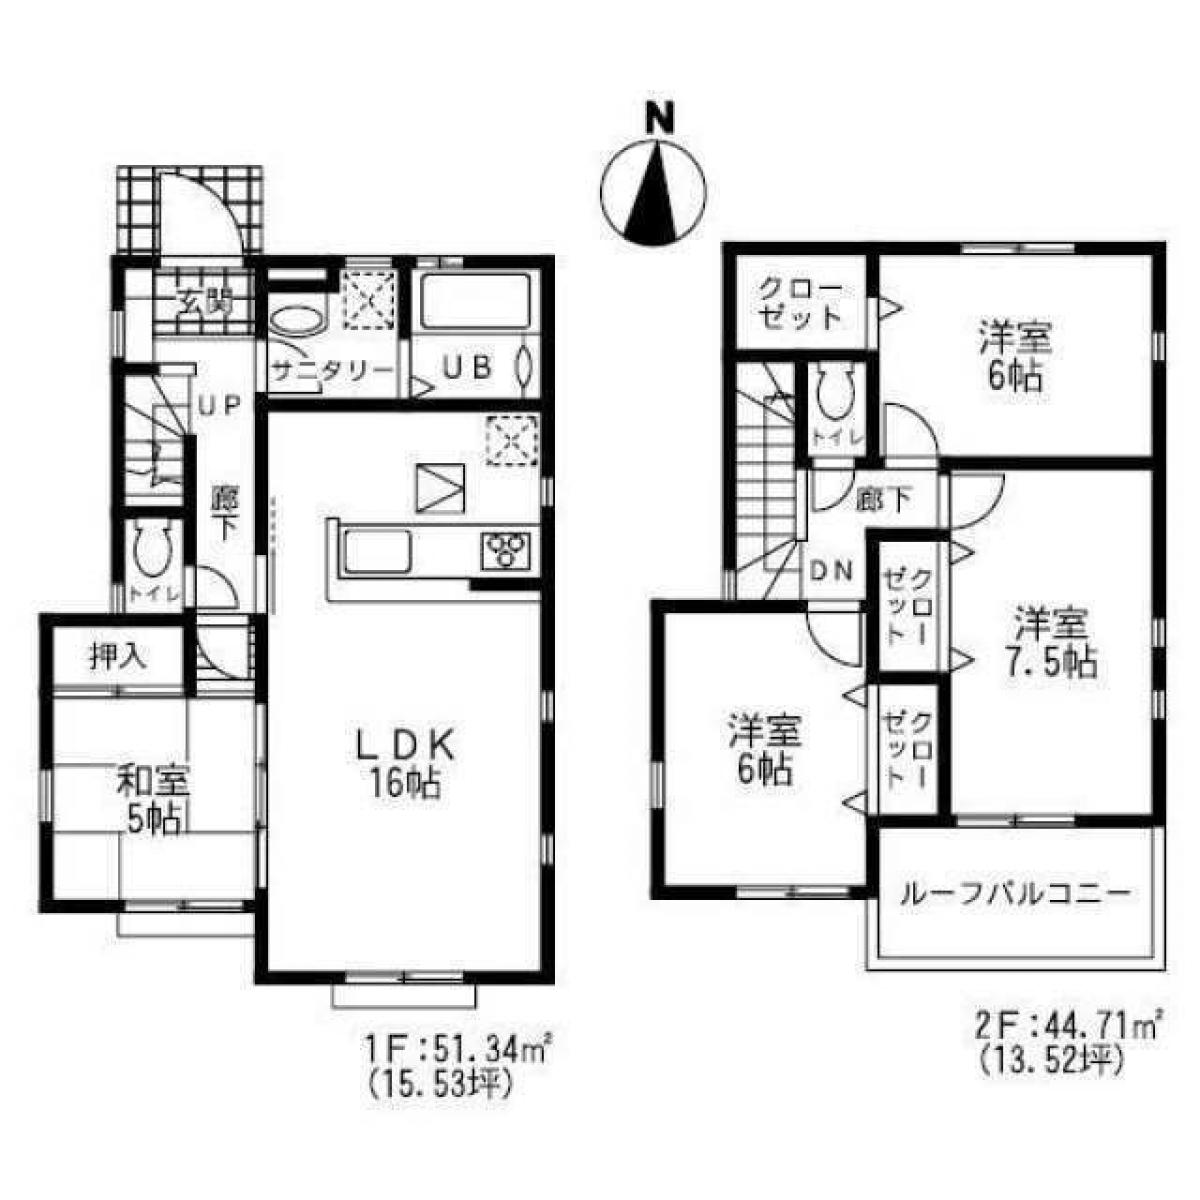 Picture of Home For Sale in Isehara Shi, Kanagawa, Japan